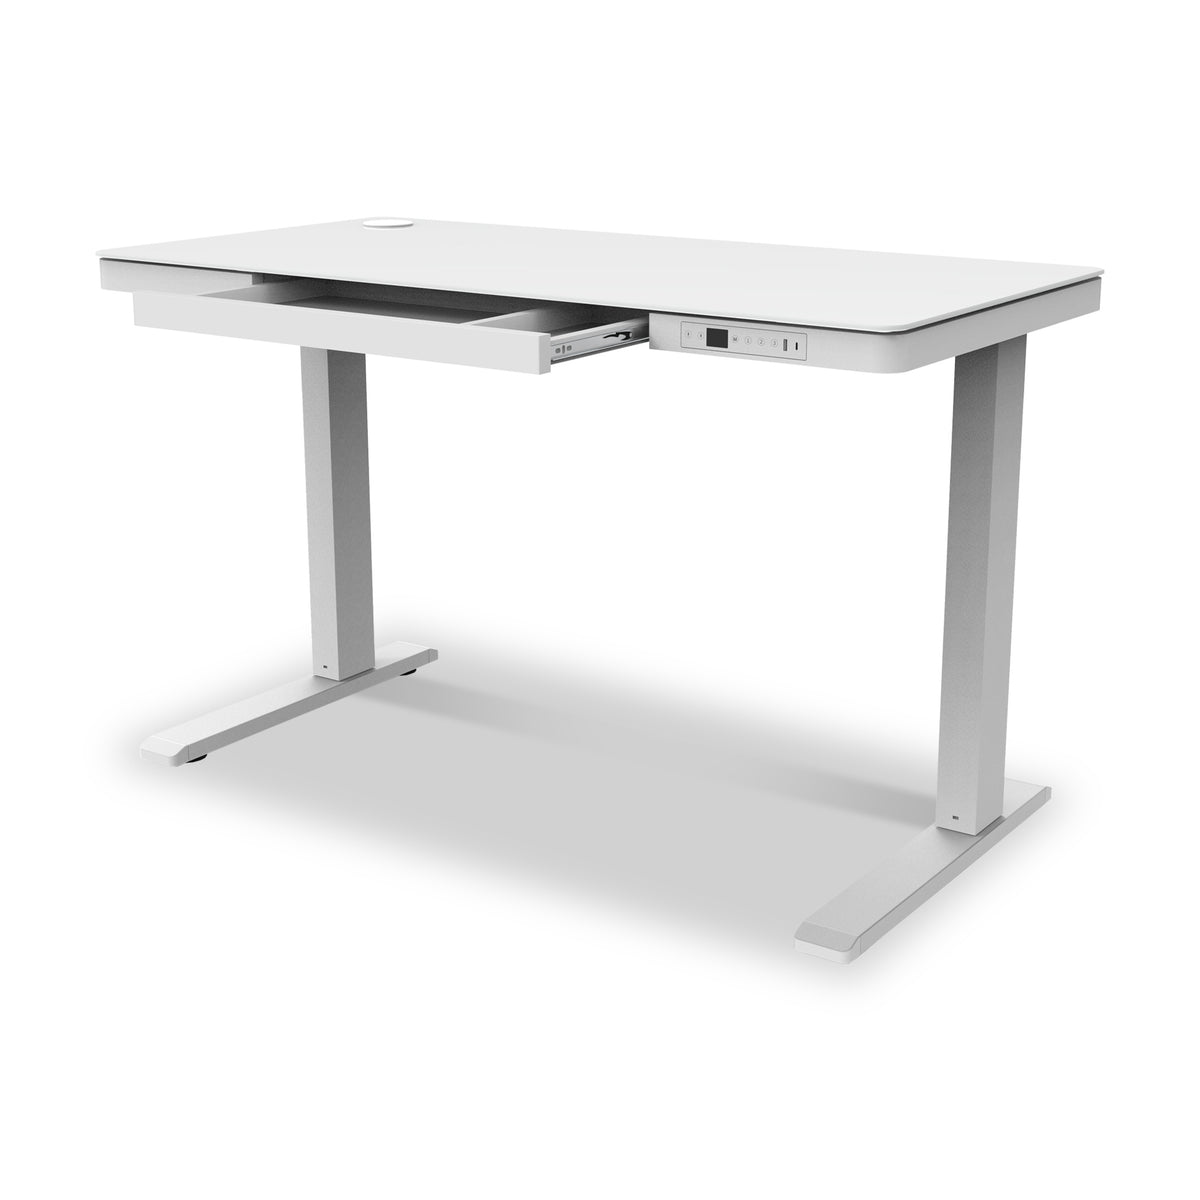 Koble Juno 4.0 White Adjustable Smart Desk with Wireless Charging